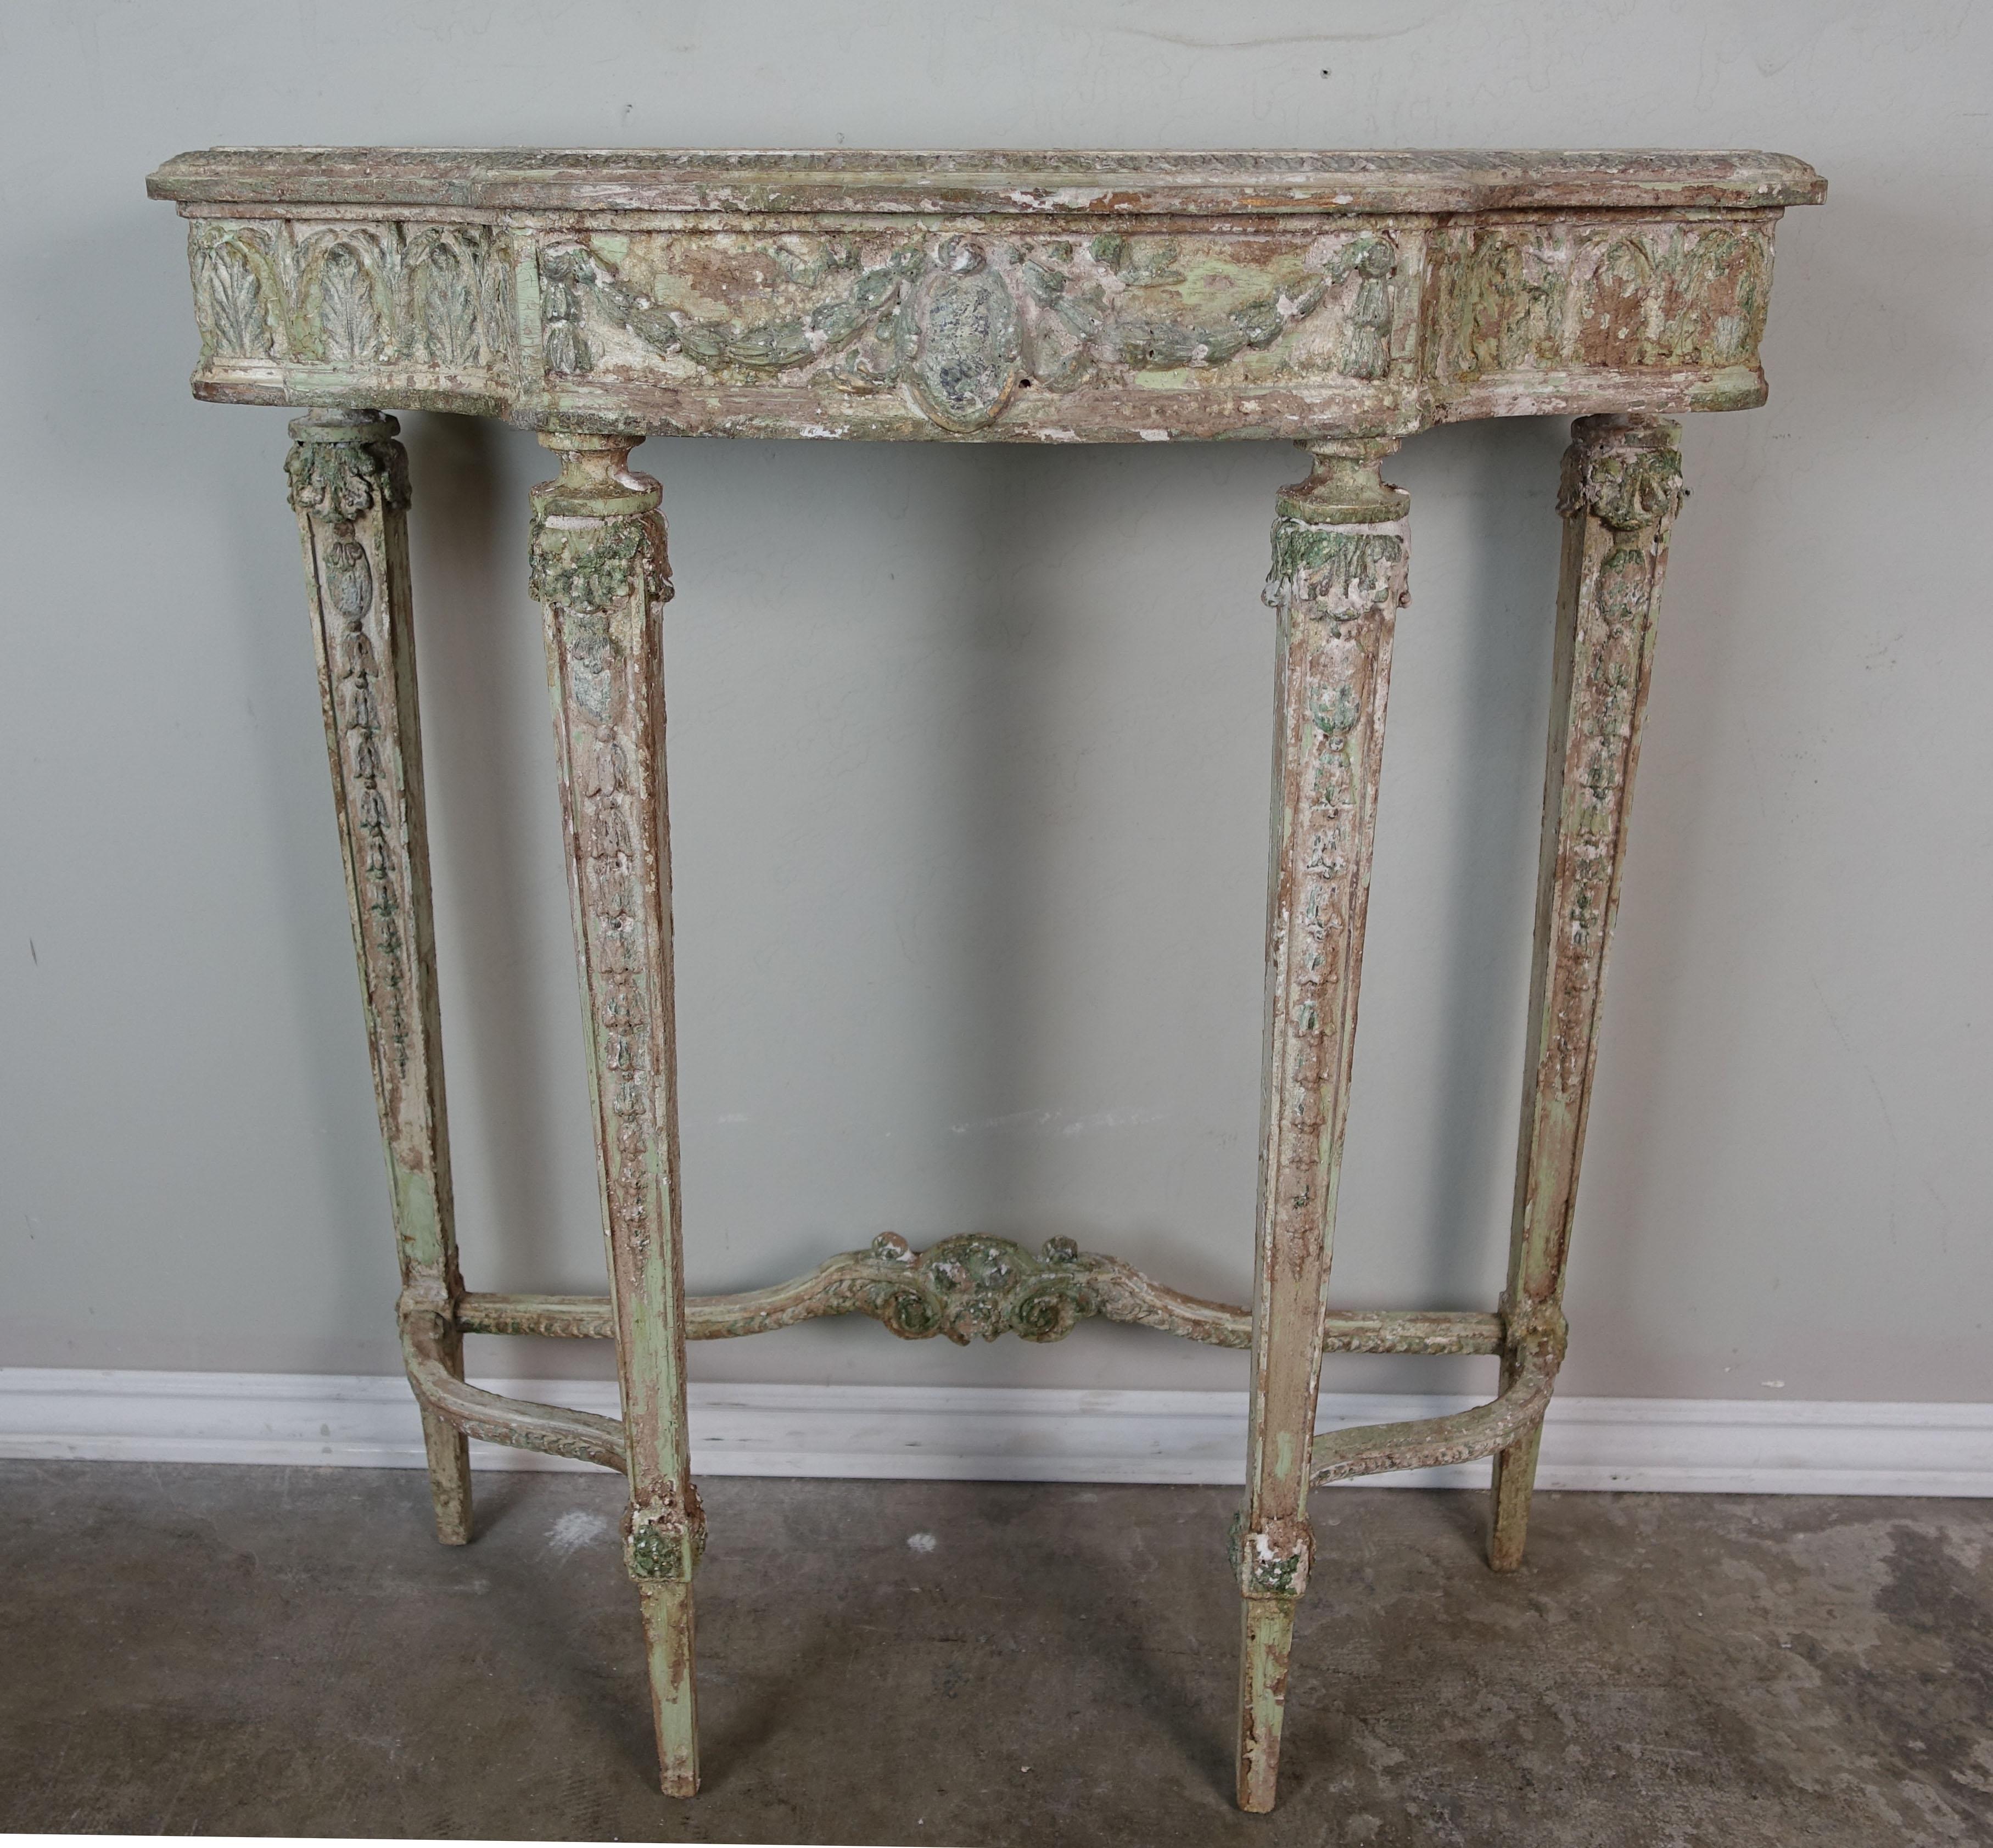 French painted neoclassical style console in a worn, distressed finish. The mirror is Rococo style with carved roses and acanthus leaves throughout in a similar worn, distressed finish.
Mirror measures 17